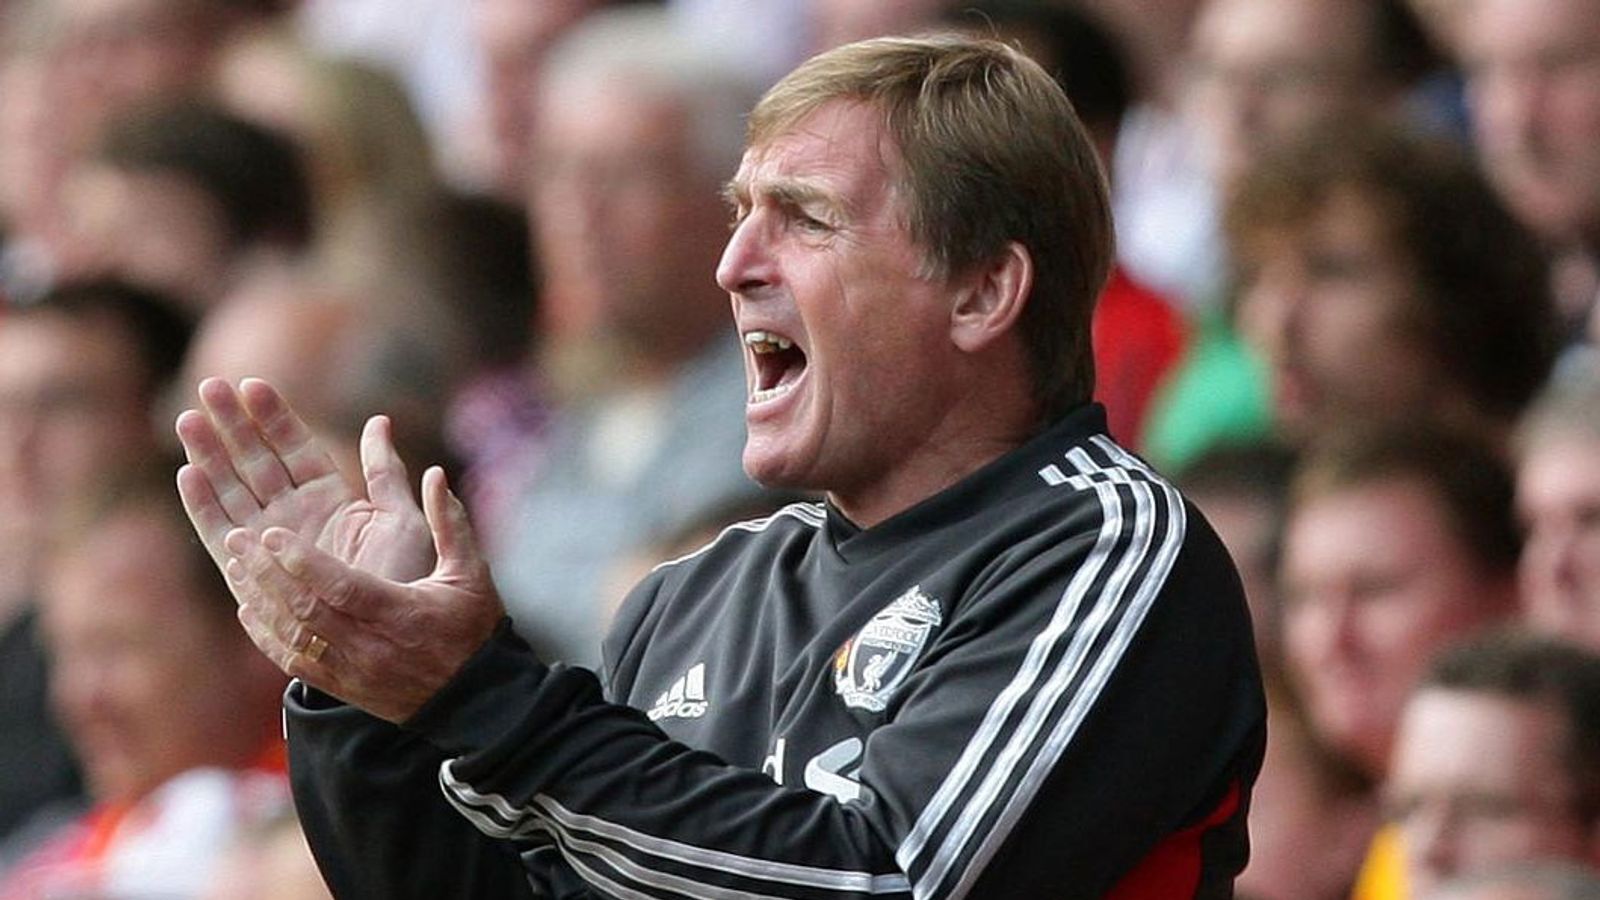 Dalglish Complimented by Former Rival Ferguson